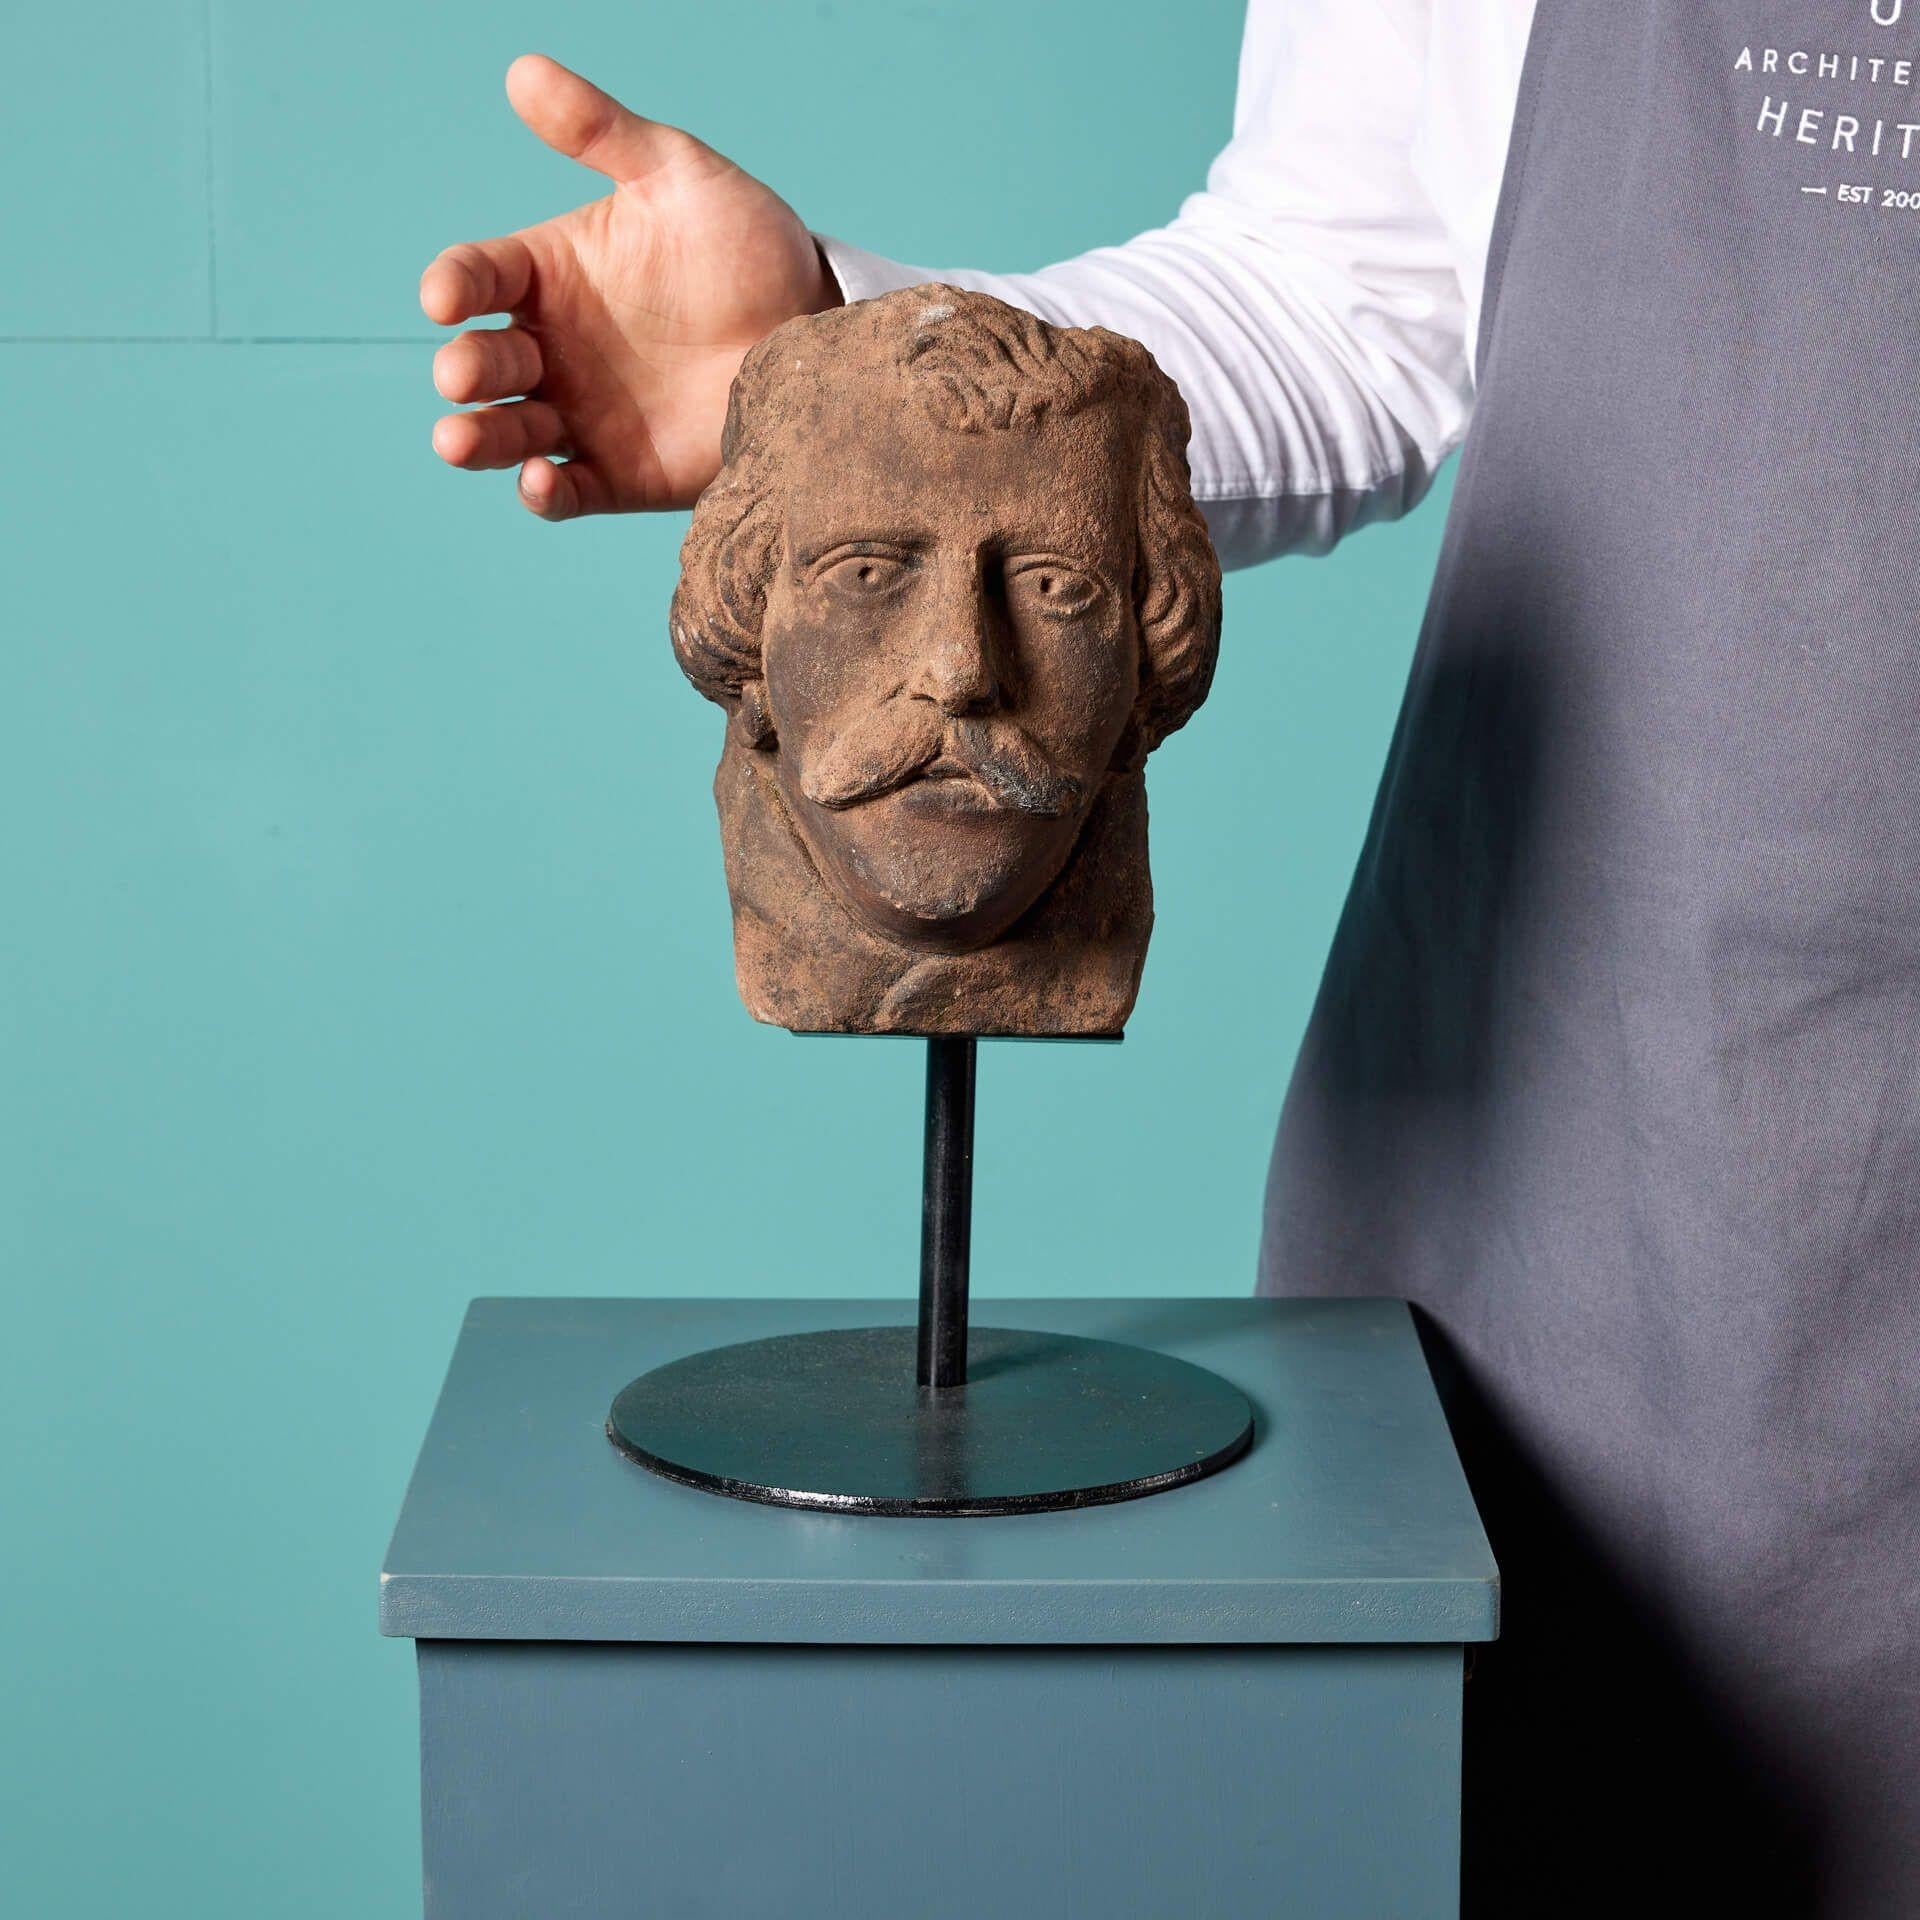 Antique carved sandstone head dating back to 1800. This carefully crafted piece has certainly stood the test of time - at 200 years old the details of this distinguished gentlemen are still very much intact. He is a moustached man, with a Victorian